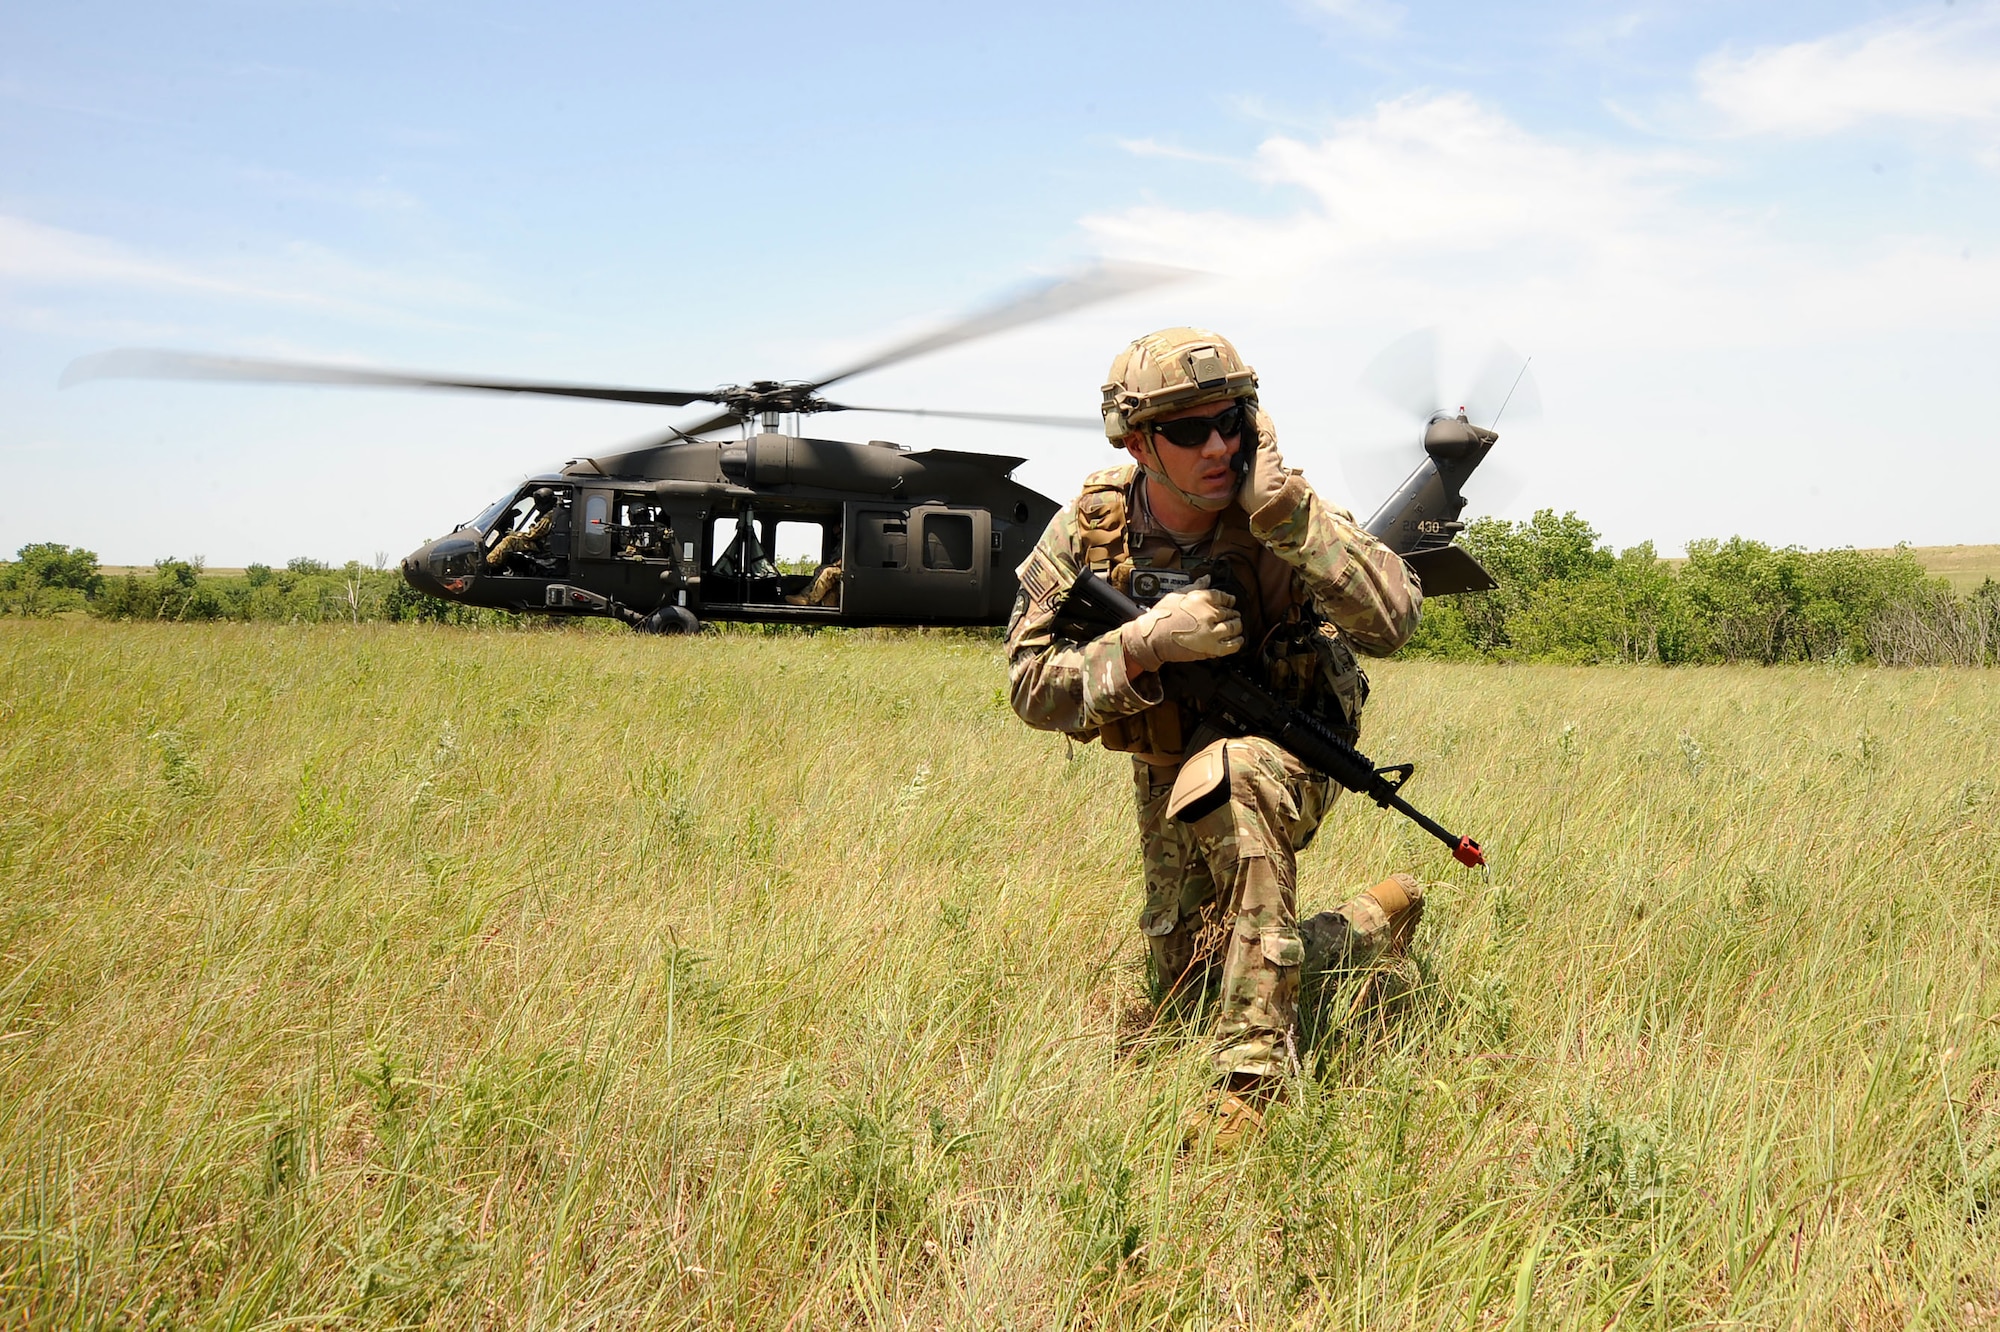 Master Sgt. Benjamin Jenkins, 10th Air Support Operations Squadron, chief joint terminal attack control instructor, communicates with aircrew in front of a UH-60 Blackhawk, June 22, 2016, at Fort Riley, Kan. JTACs provide Air Force support by planning and controlling combat air resources and operating communications in support of Army ground maneuver units. (U.S. Air Force photo/Airman 1st Class Jenna K. Caldwell)